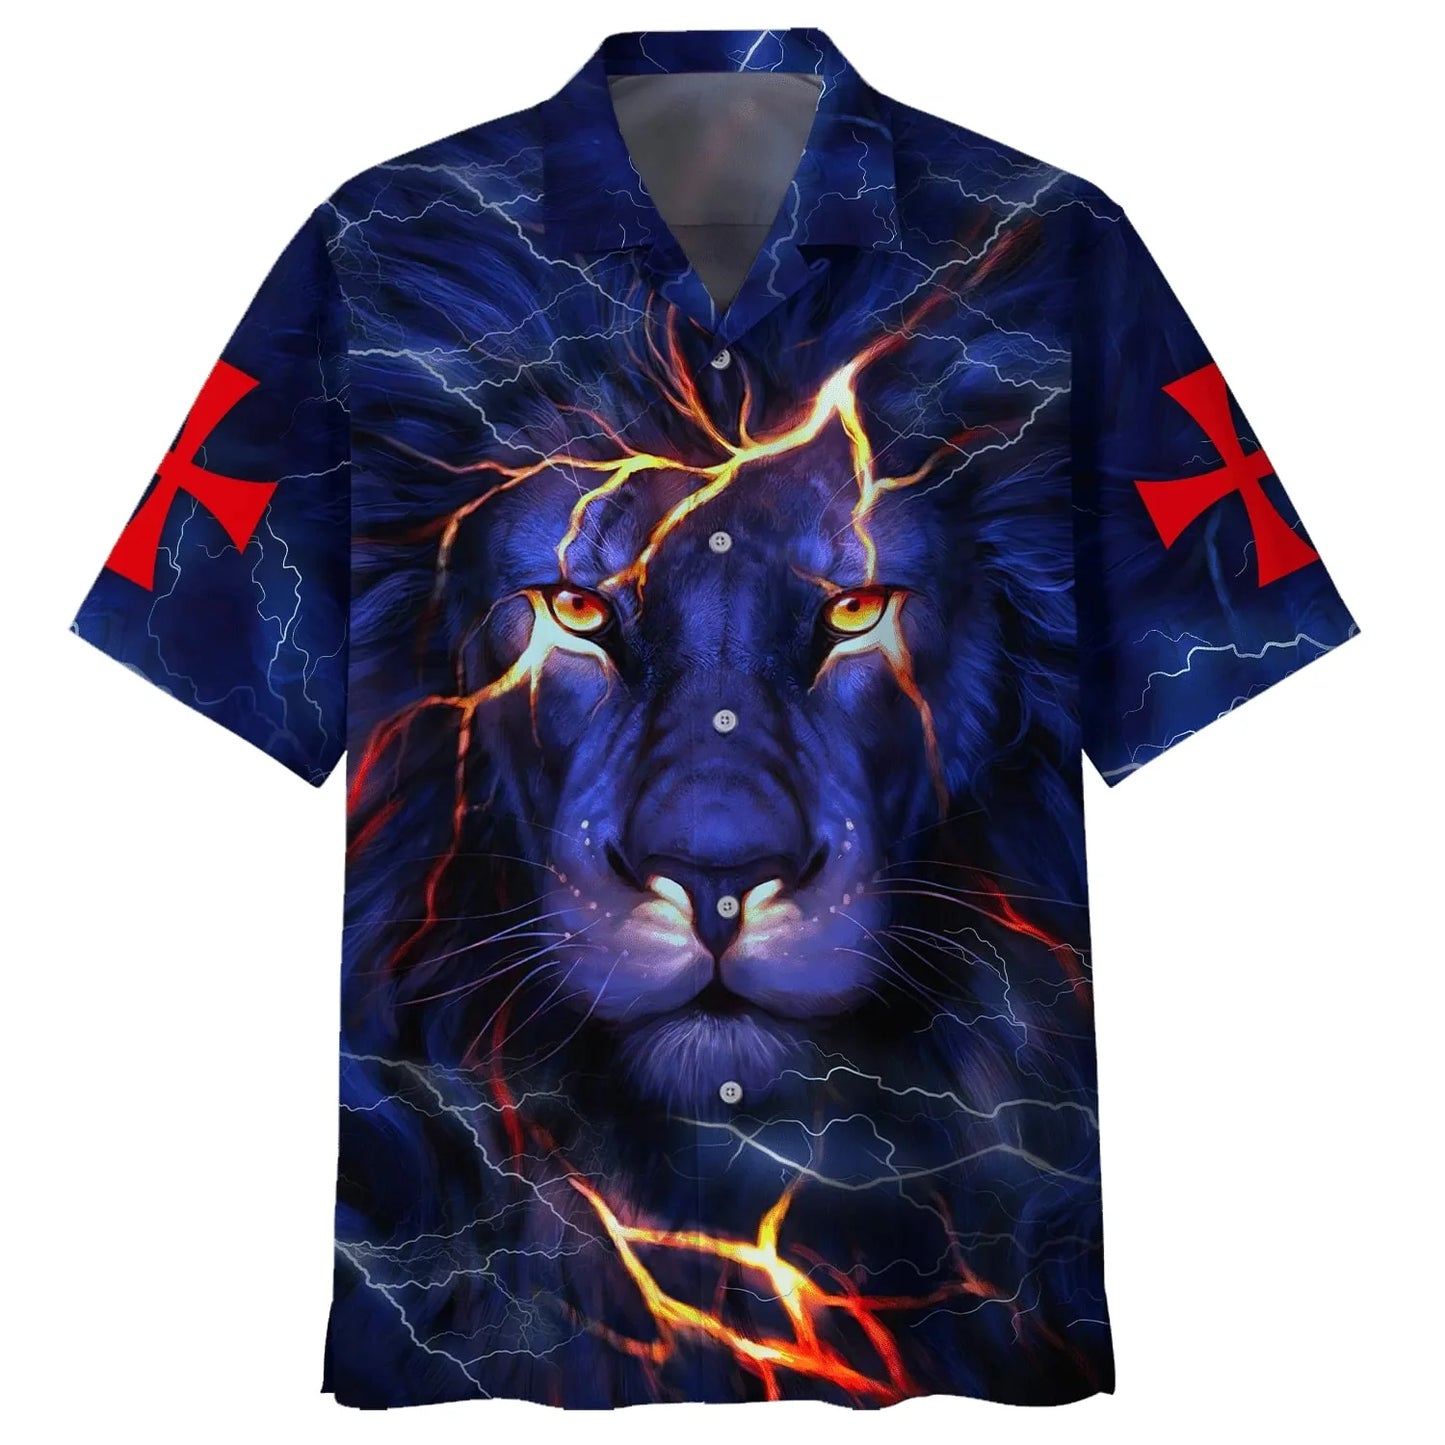 Christianartbag Hawaiian Shirt, Way Maker Miracle Worker Promise Keeper Light In The Darkness My God That Is Who You Are Lion Hawaiian Shirt, Christian Hawaiian Shirts For Men & Women. - Christian Art Bag